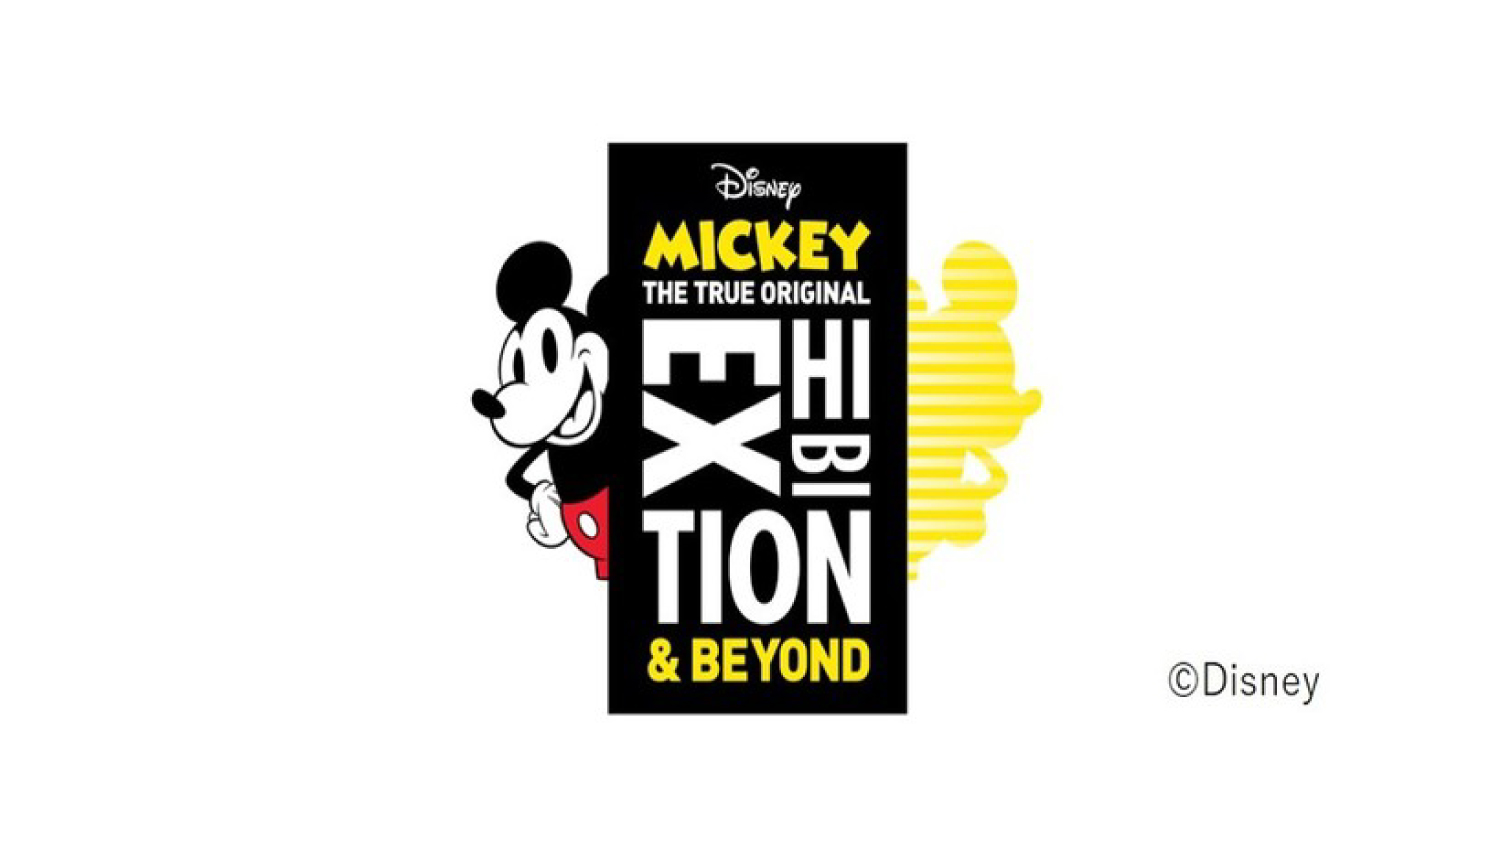 Mickey Mouse Exhibition 'THE TRUE ORIGINAL & BEYOND' to be Held in 